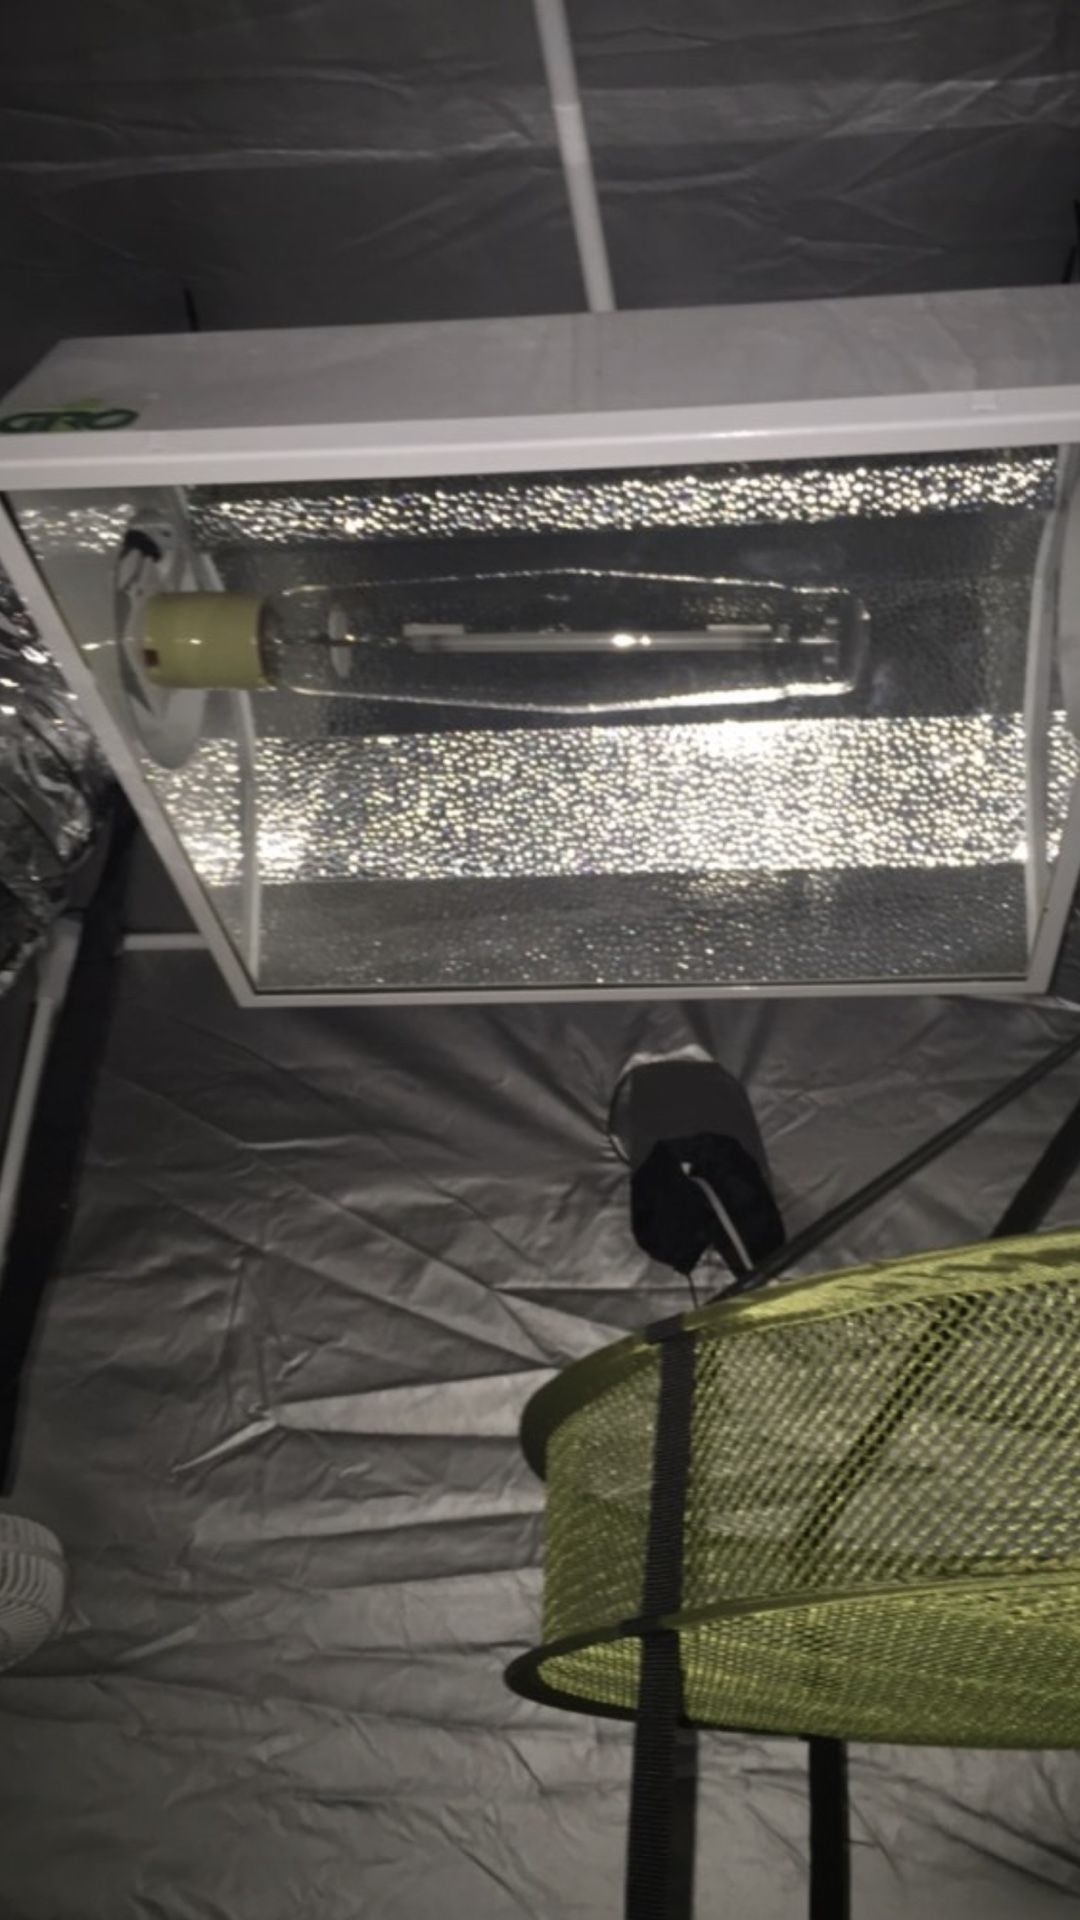 Hydro grow tent and supplies